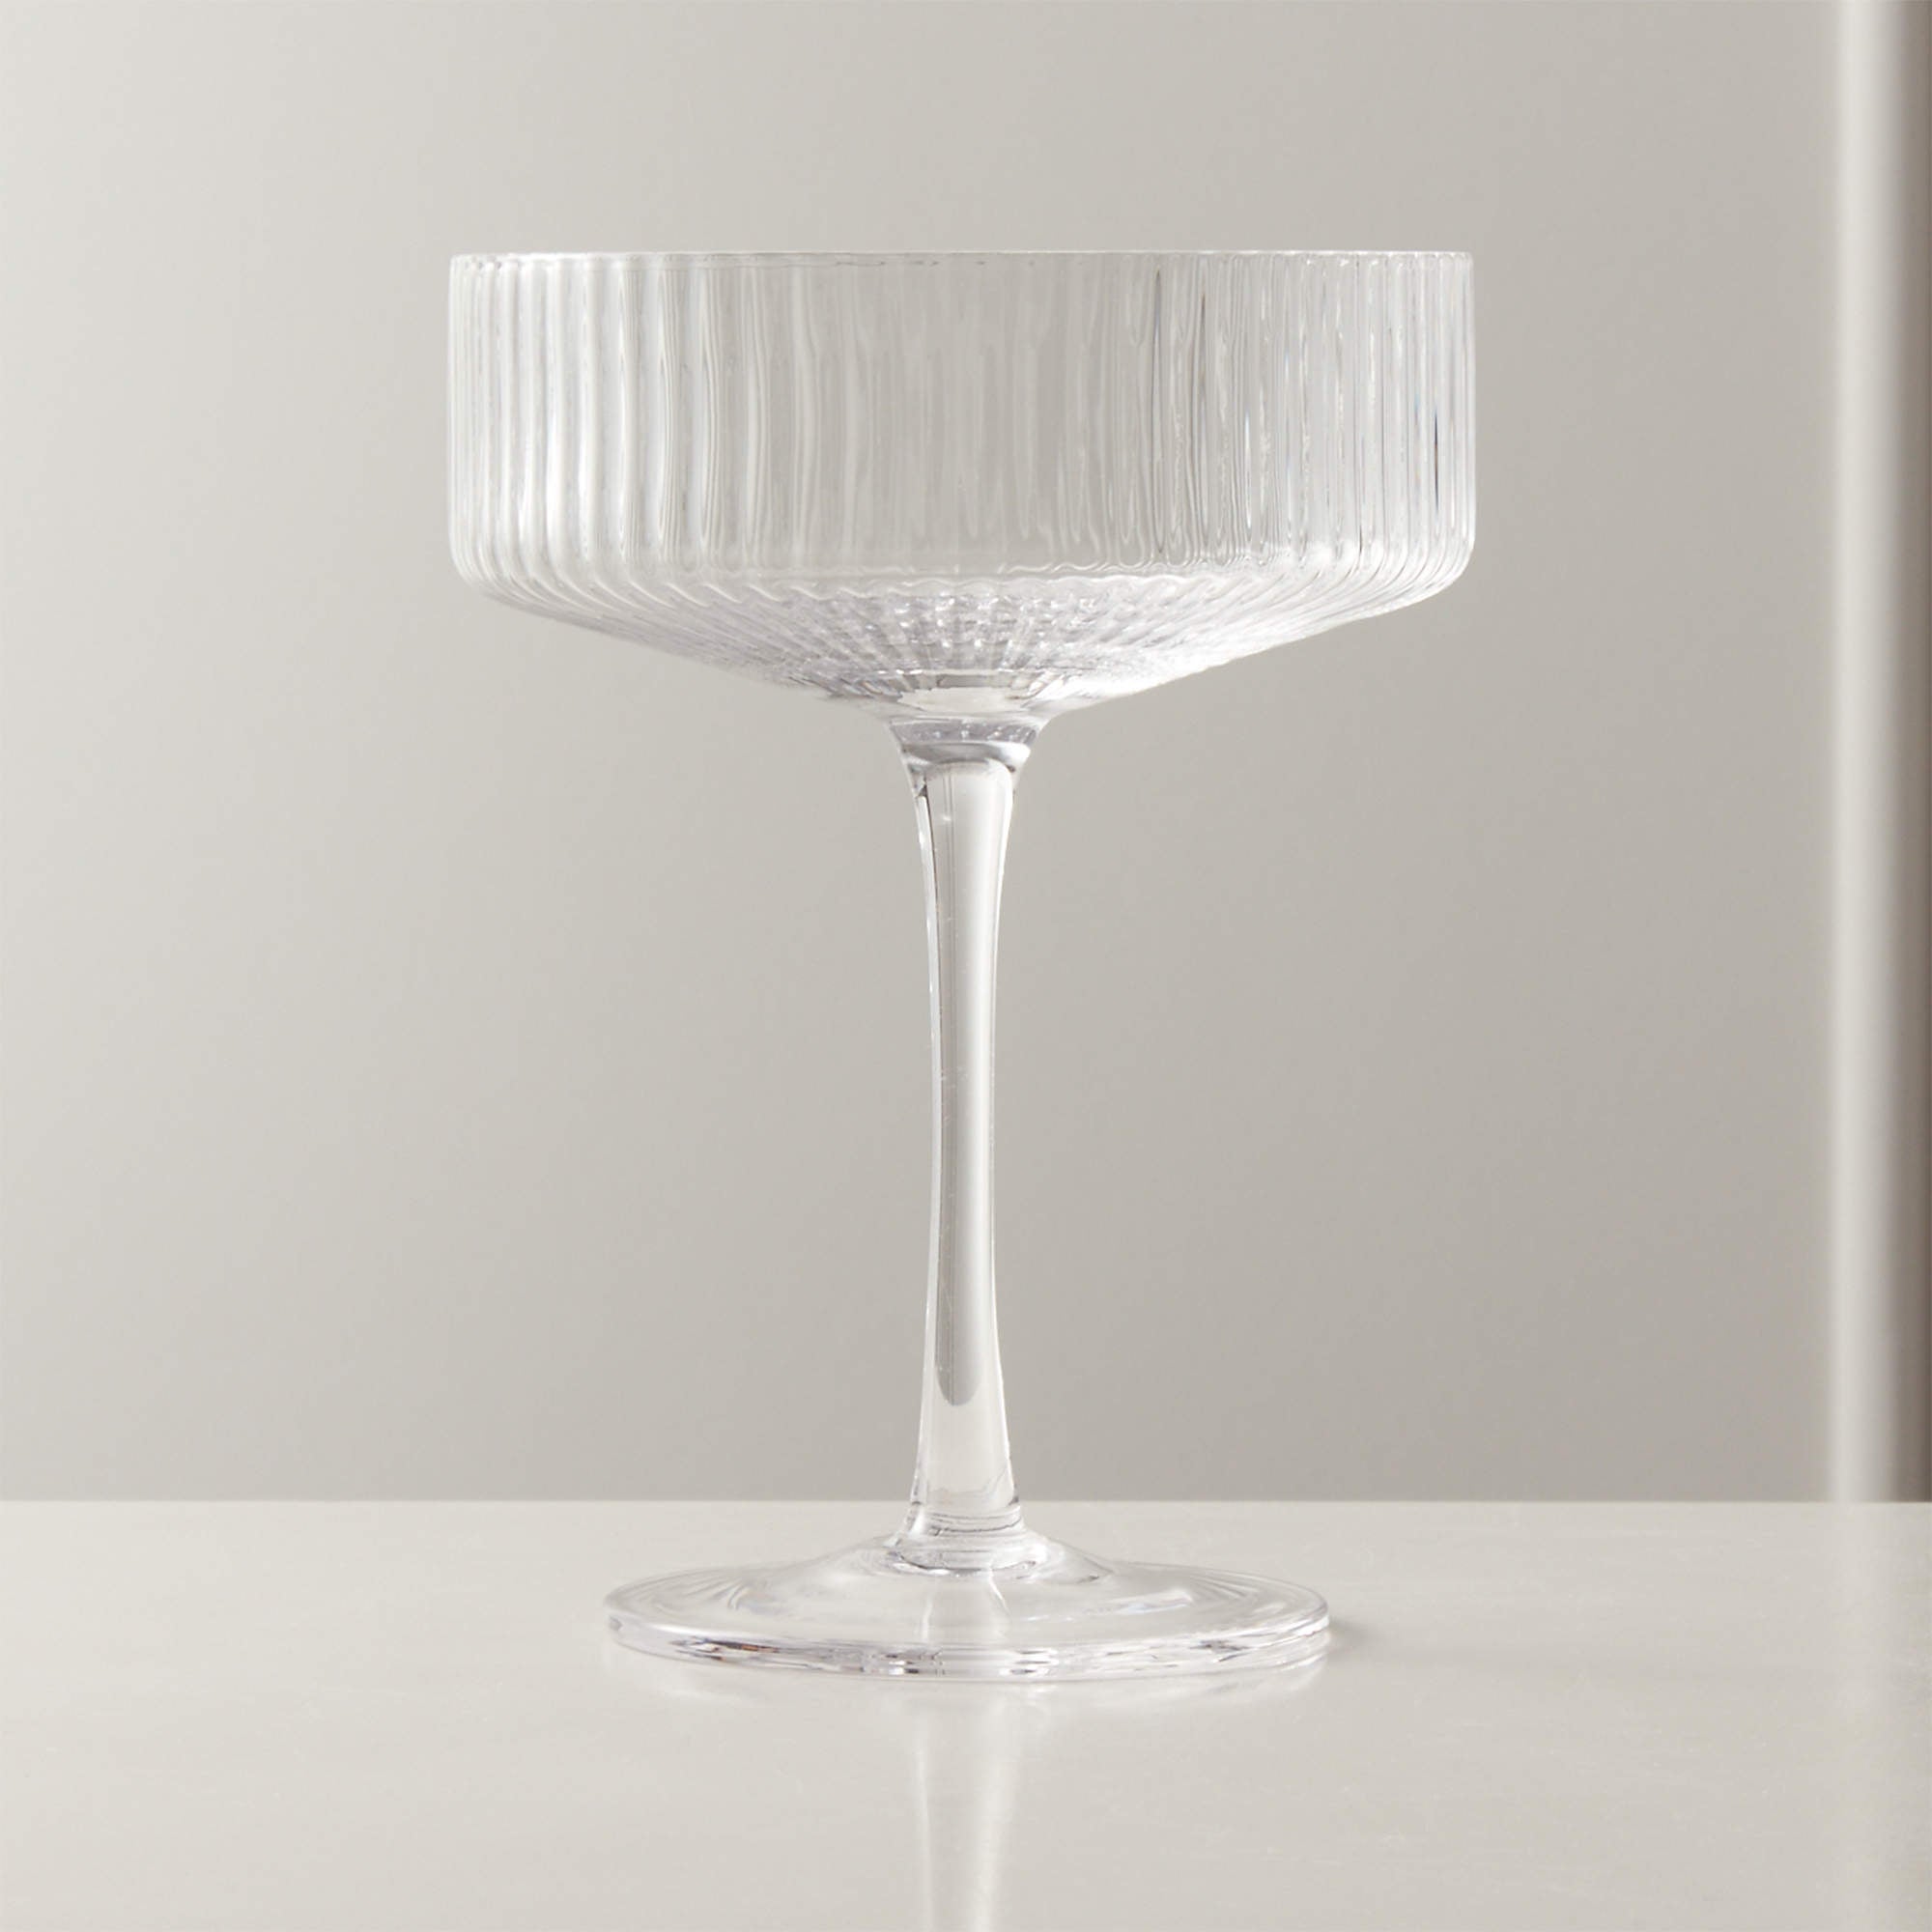 Two-Tone Coupes, Ribbed Vessels, and More Glasses Worthy of the Best Champagne